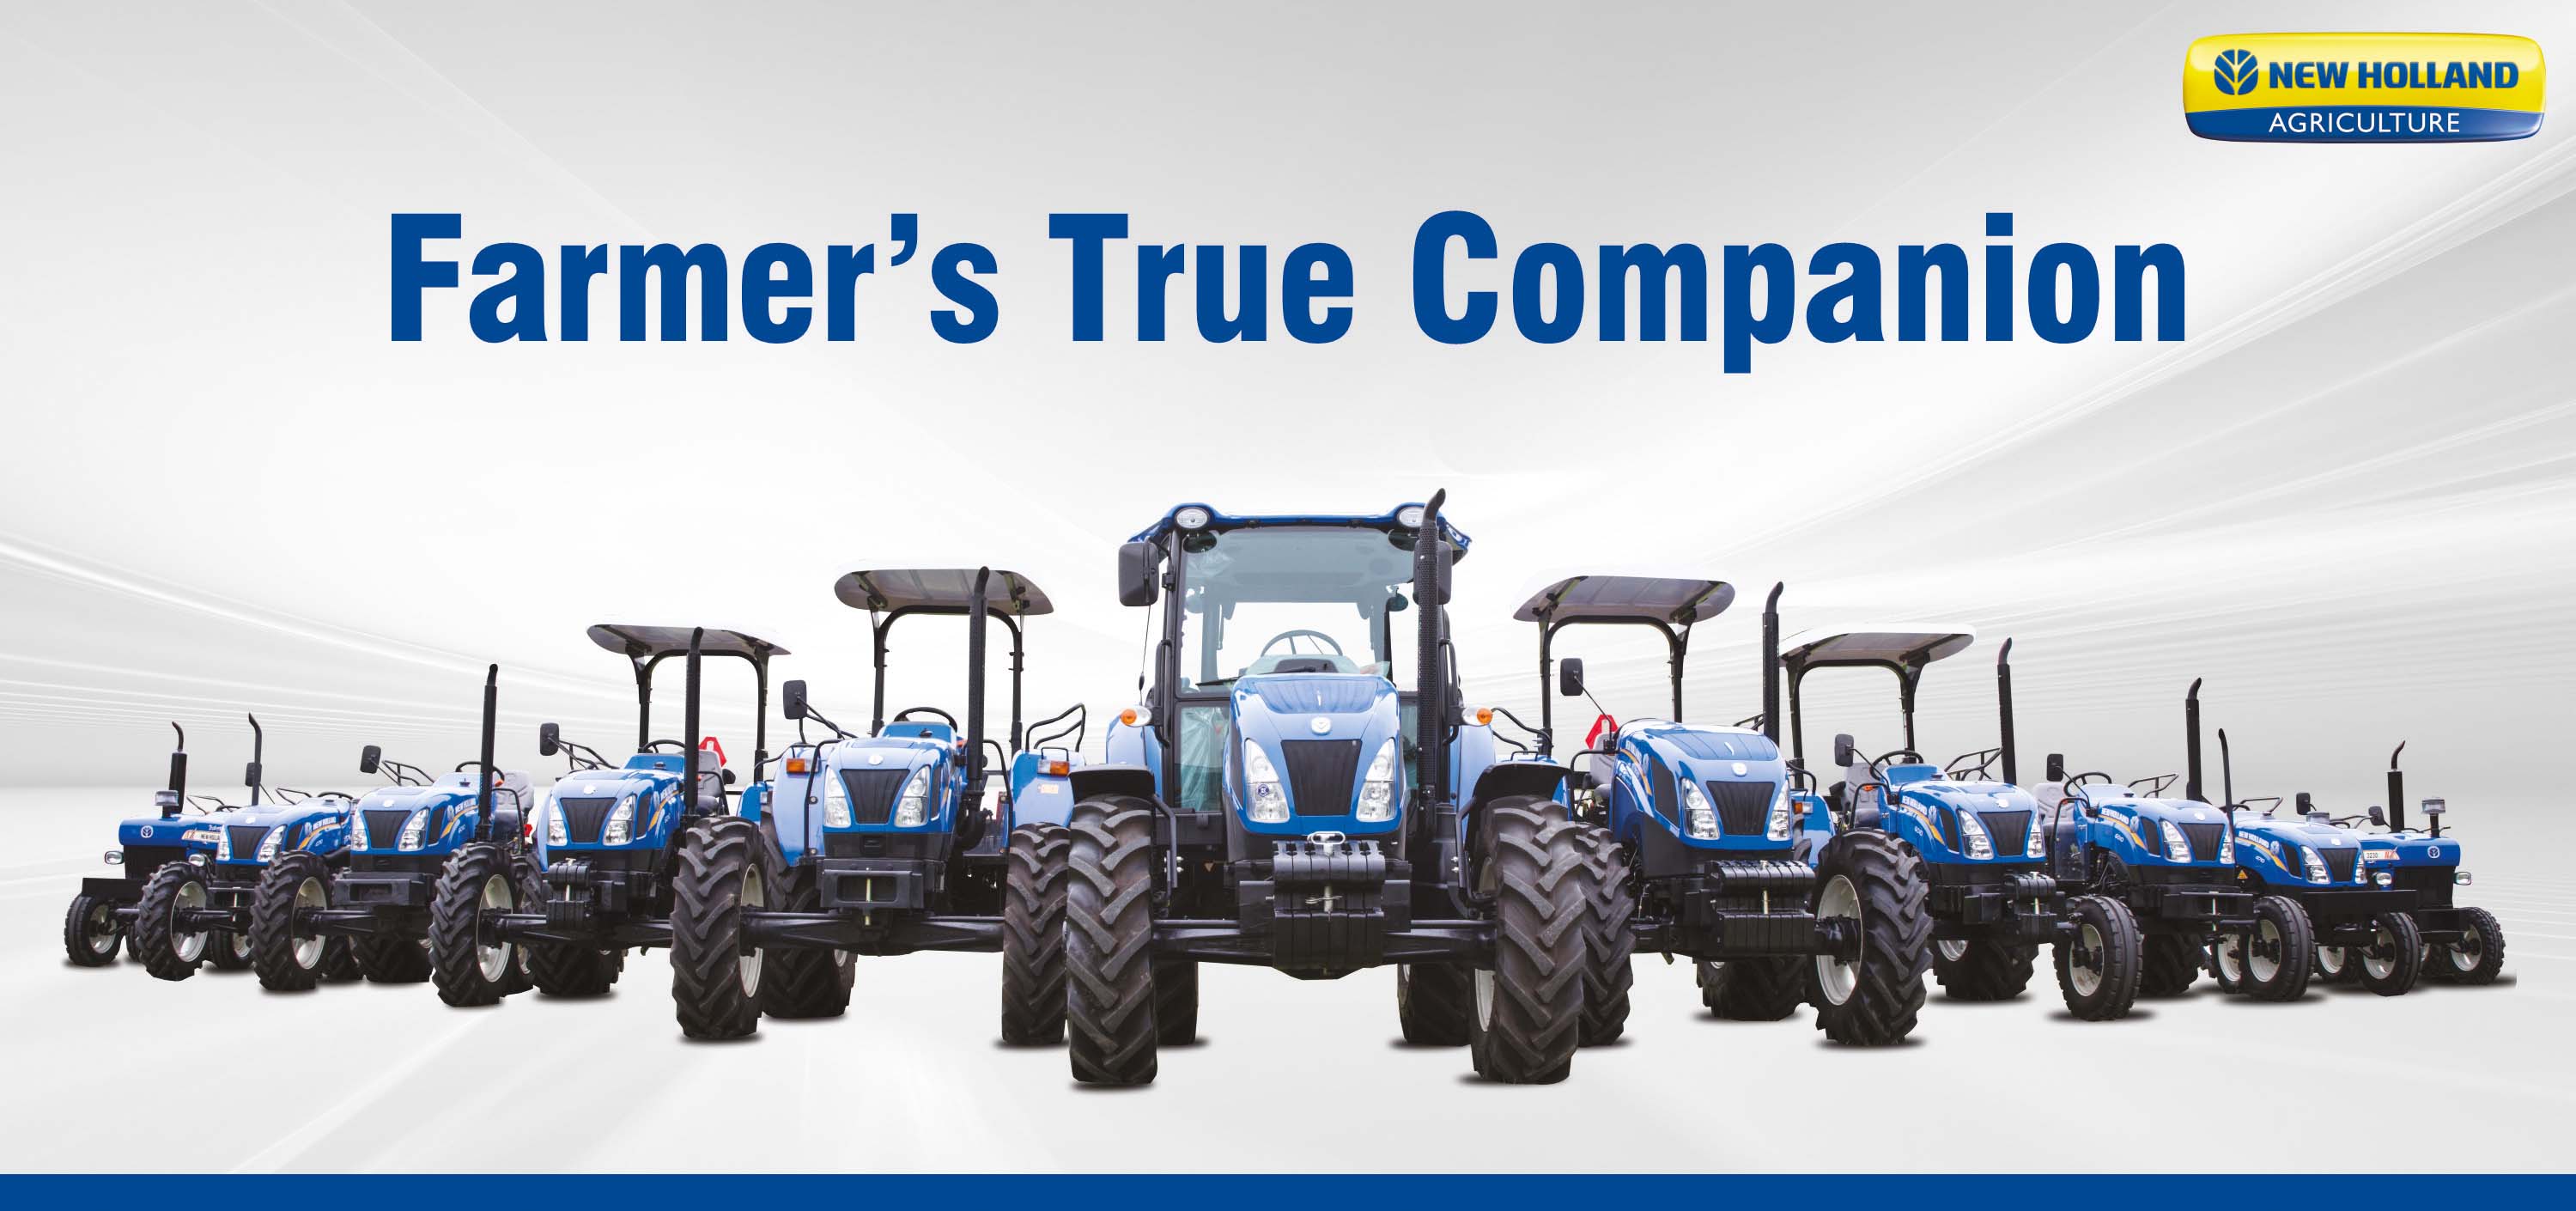 New Holland Agriculture - Khandwa Road, Indore